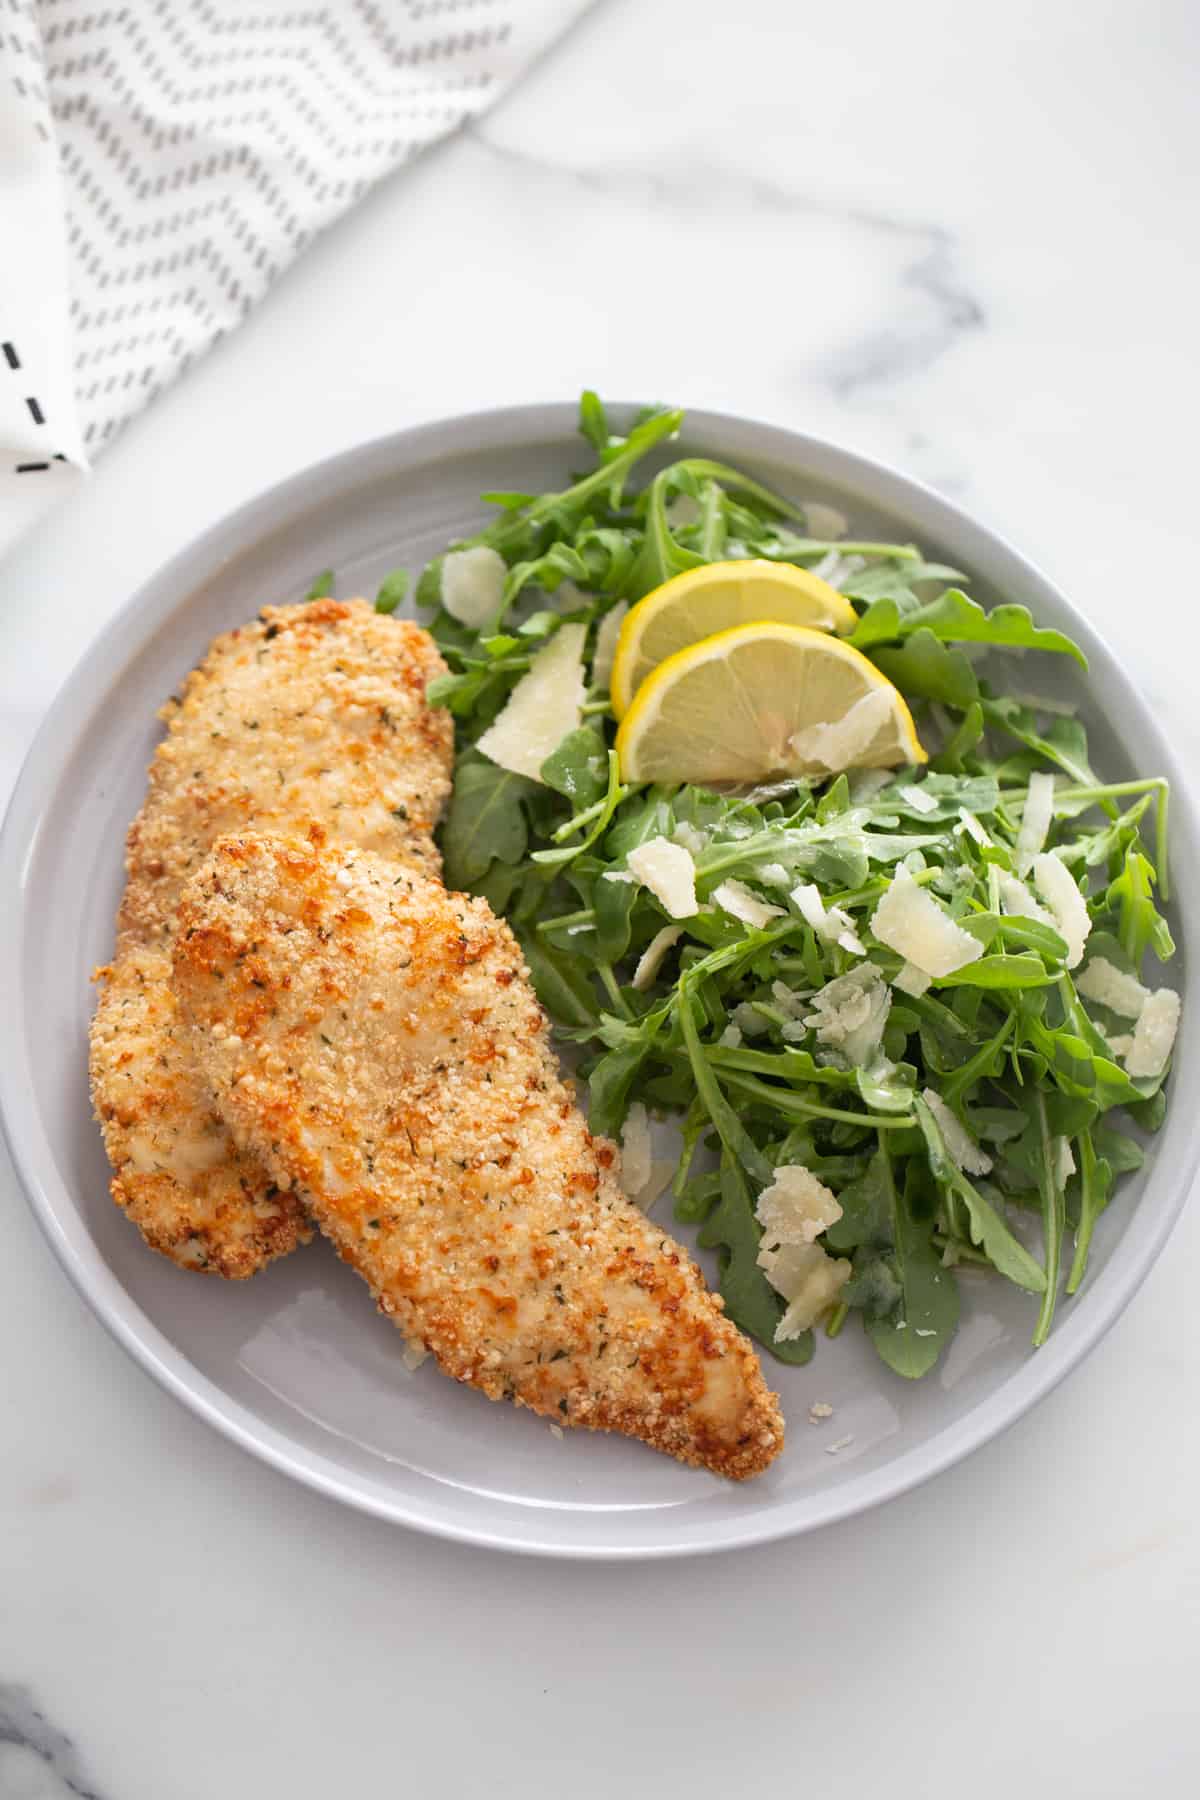 Overhead shot of golden brown two chicken cutlets plated with a side salad of arugula, lemon, and shredded parmesan